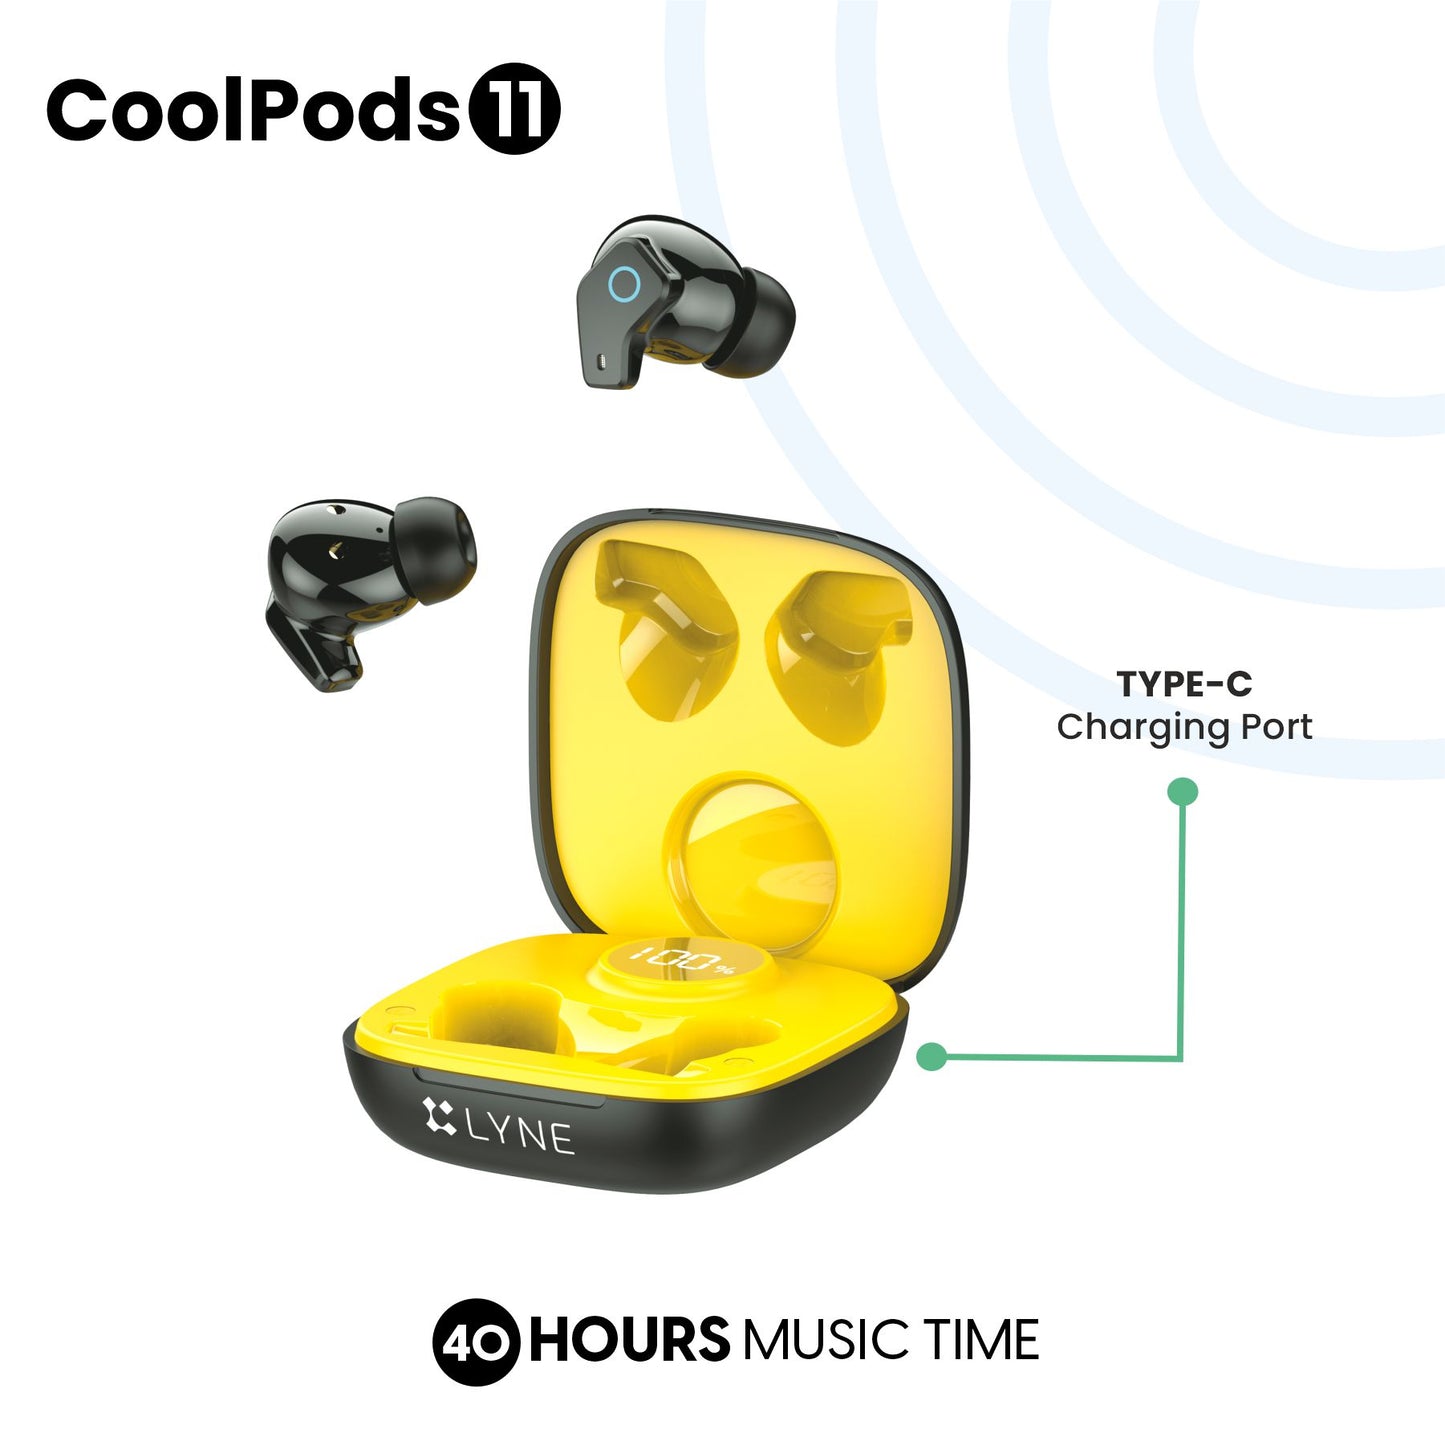 LYNE CoolPods 11 40 Hours Music Time True Wireless Earbuds with IPX4 Water Resistance